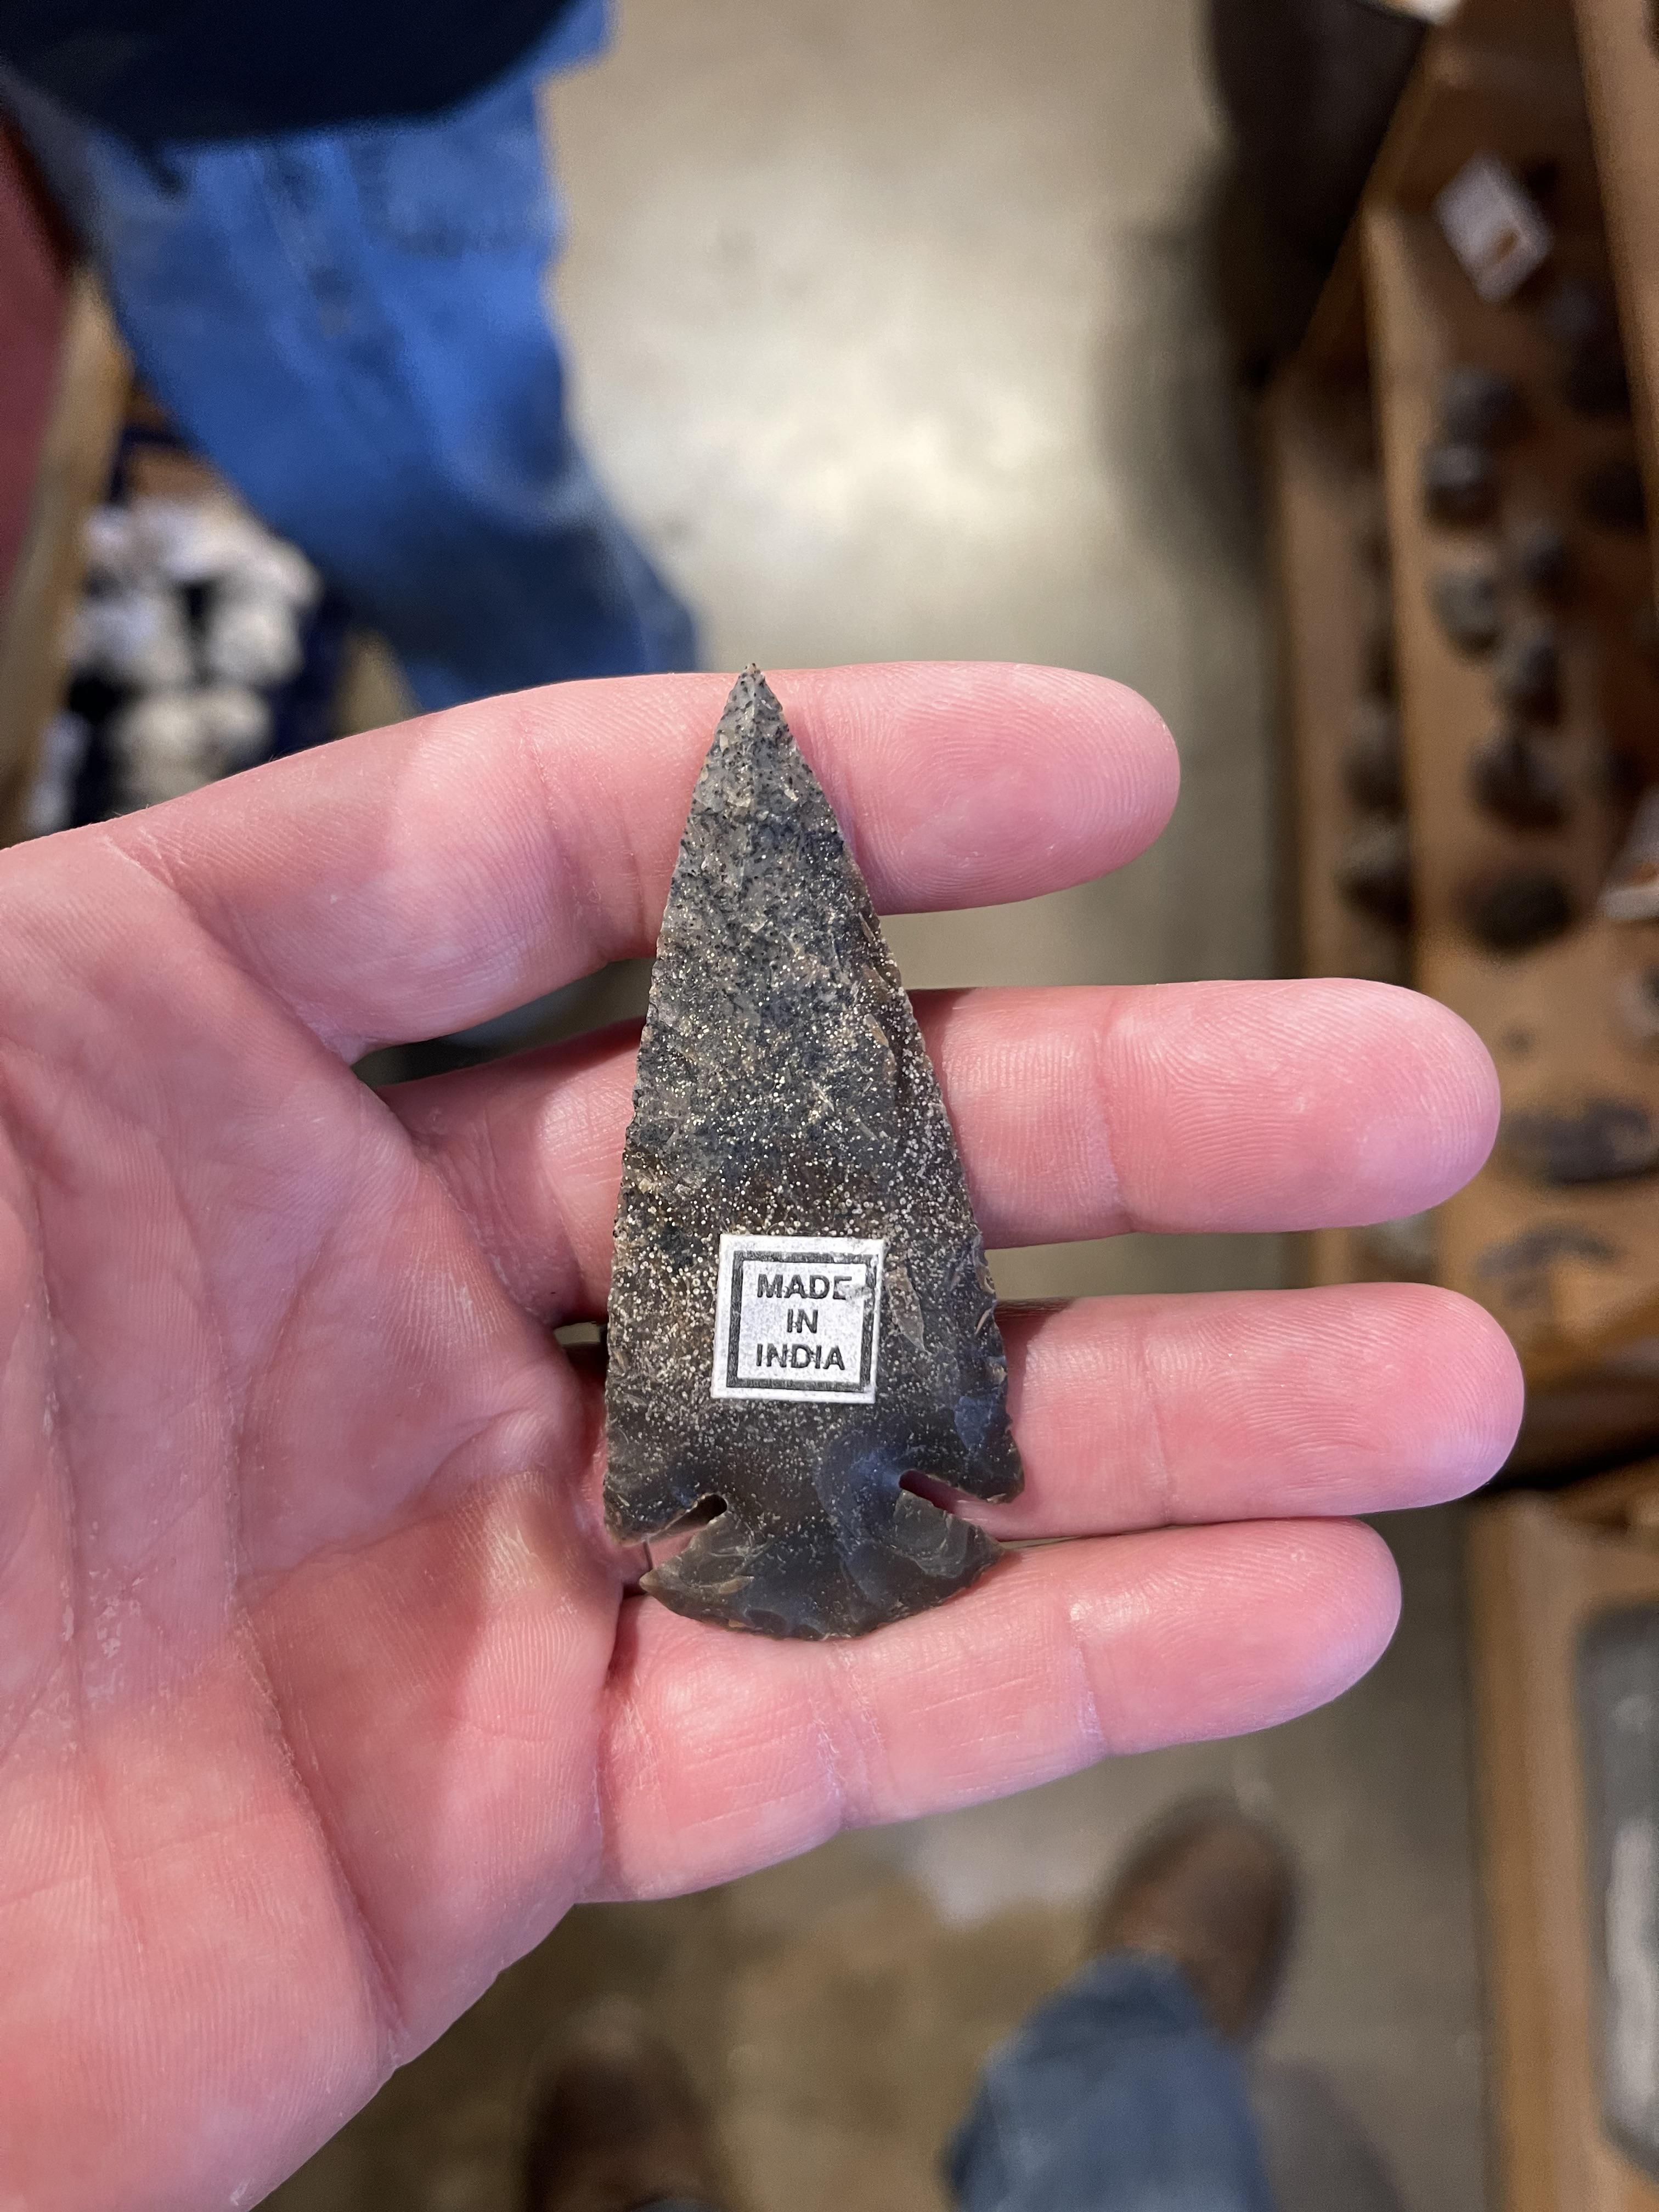 Found an authentic Indian arrowhead today.